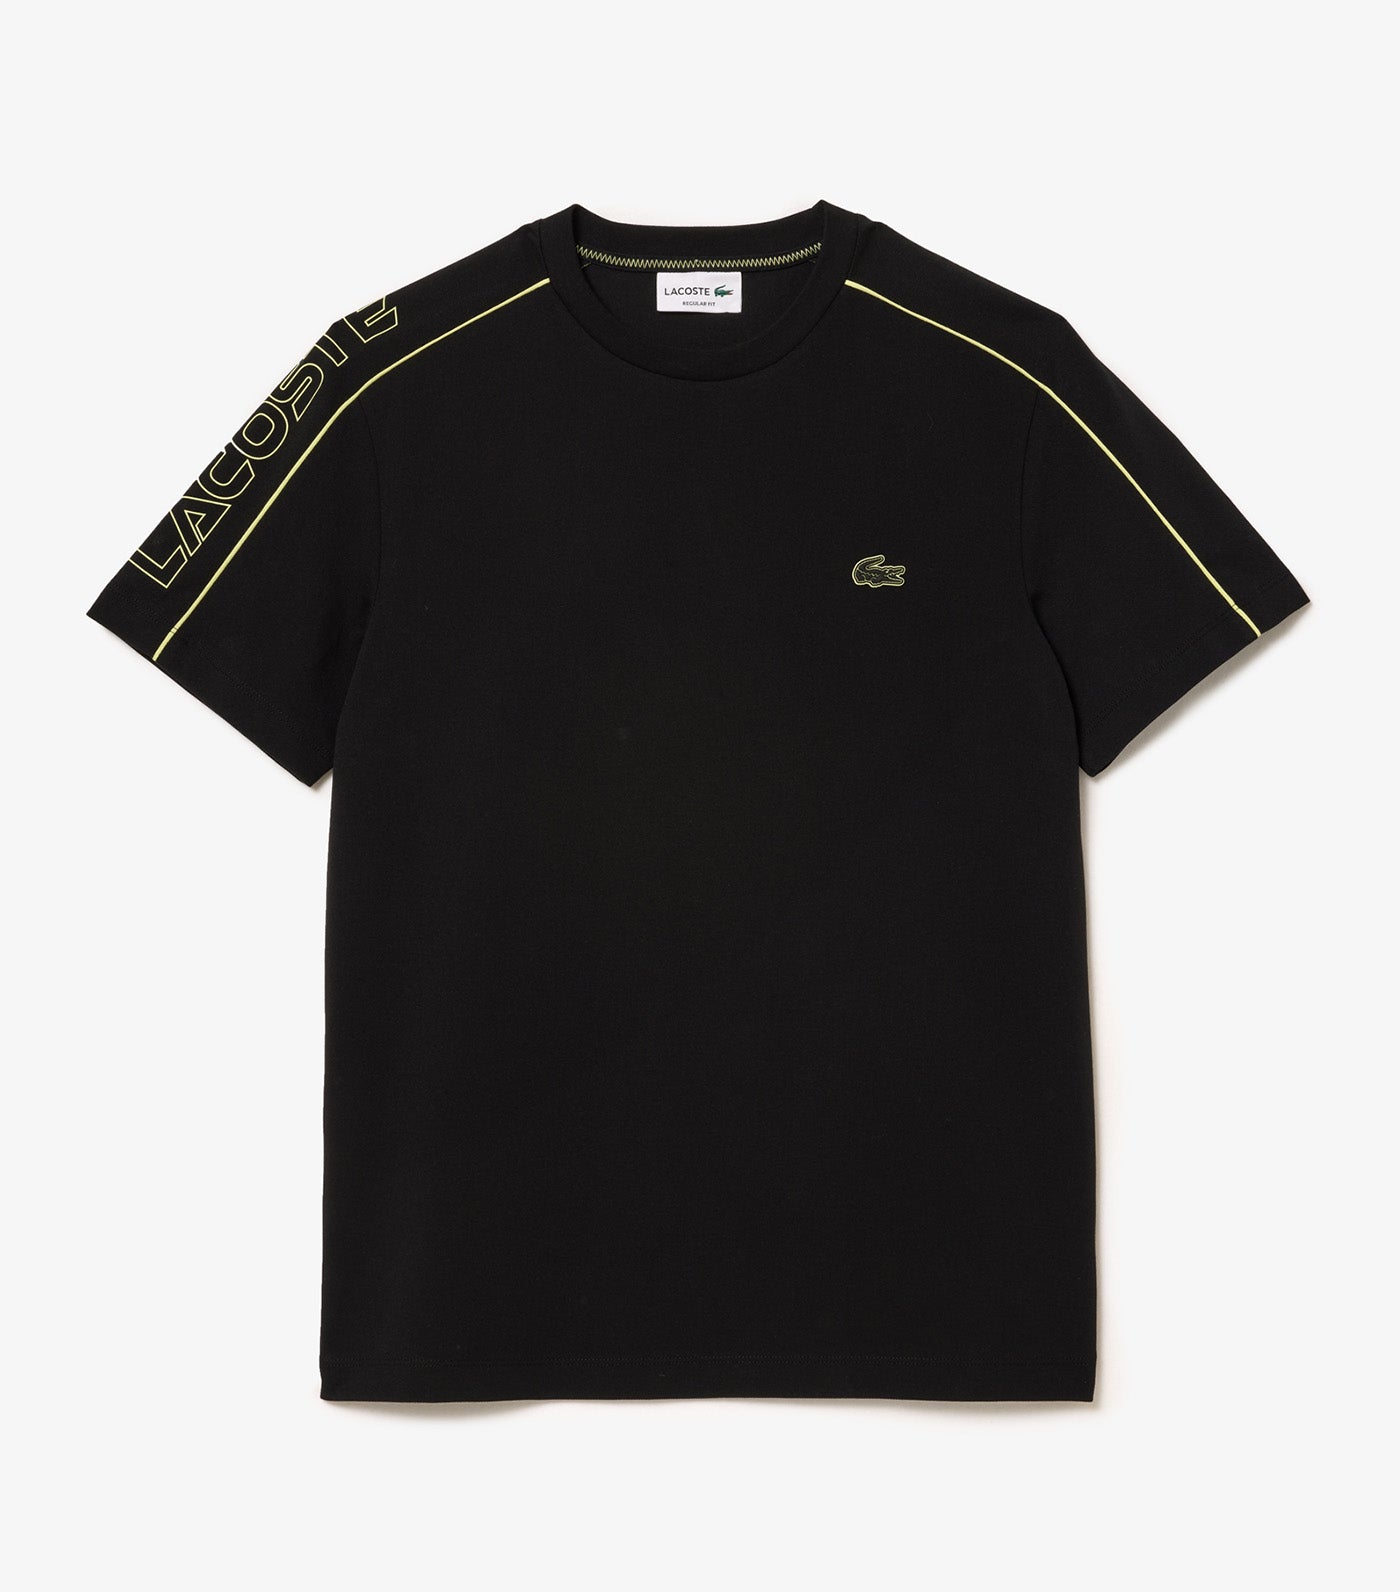 Contrast Accent Lacoste Branded T-Shirt Black/Limeira